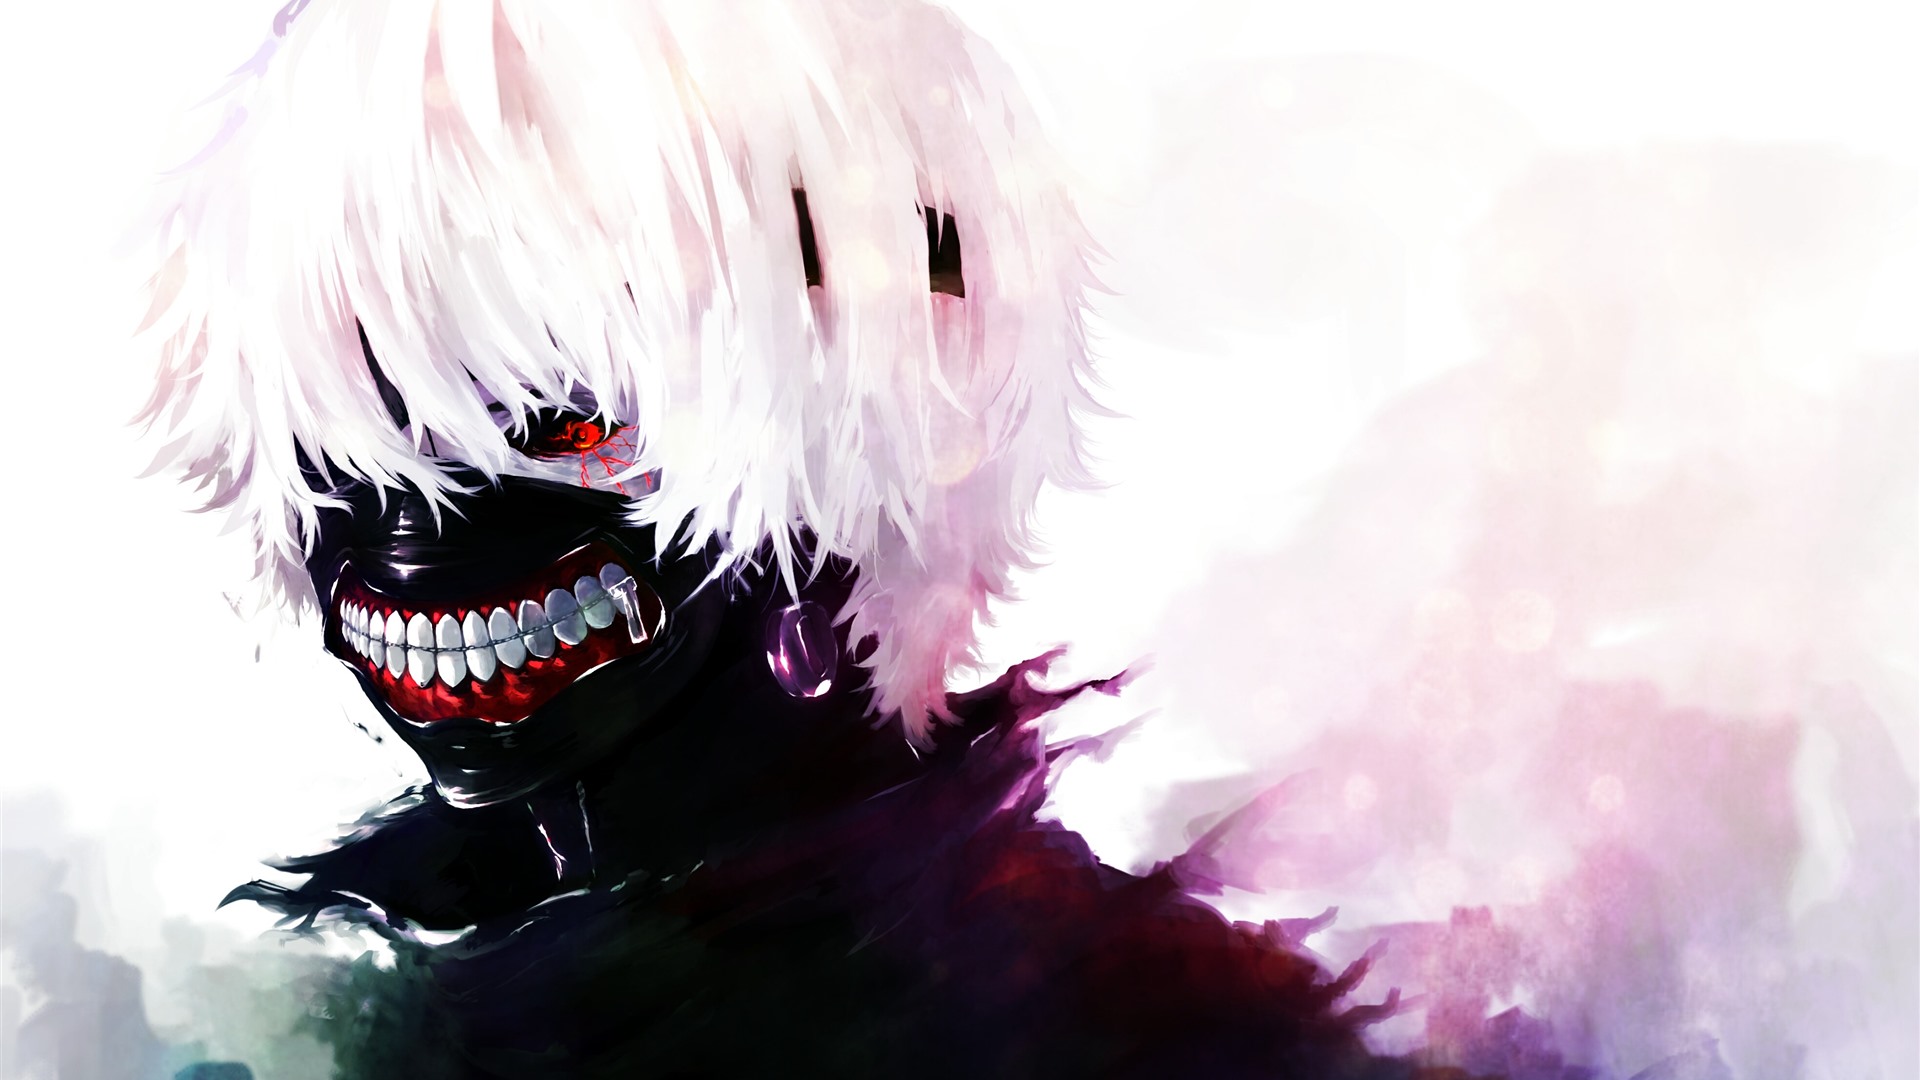 tokyo ghoul wallpaper,anime,cg artwork,mouth,fictional character,illustration